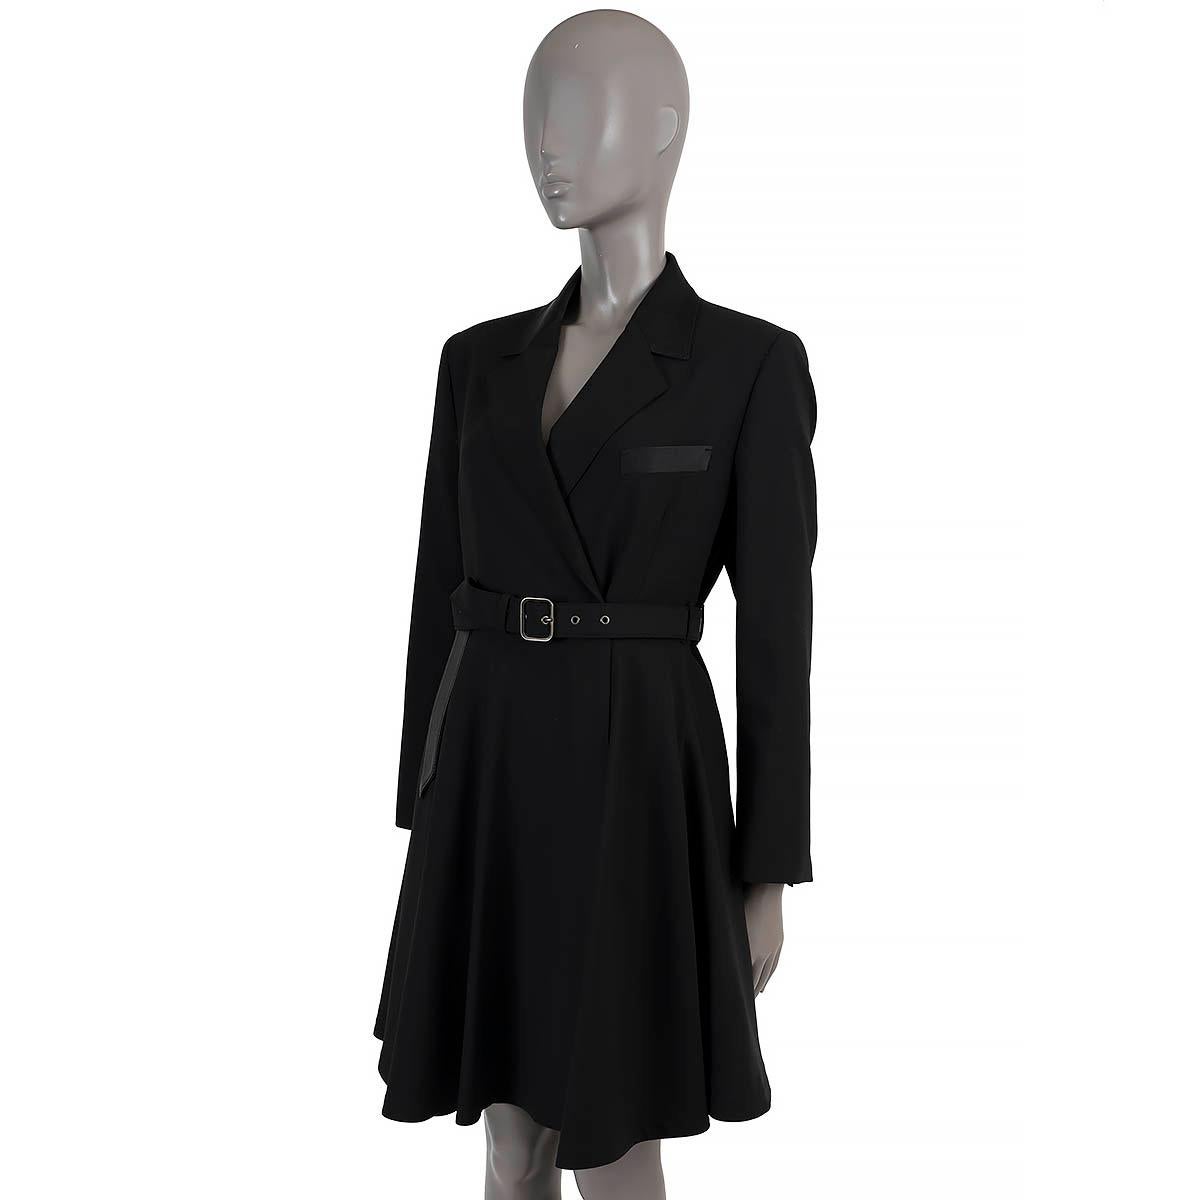 100% authenticSalvatore Ferragamo belted blazer dress in black wool (100% please note that the tag missing). Features a chest pocket and concealed buttoned cuffs. Closes with buttons on the front and a belt. Lined in acetate (80%) an silk (20%